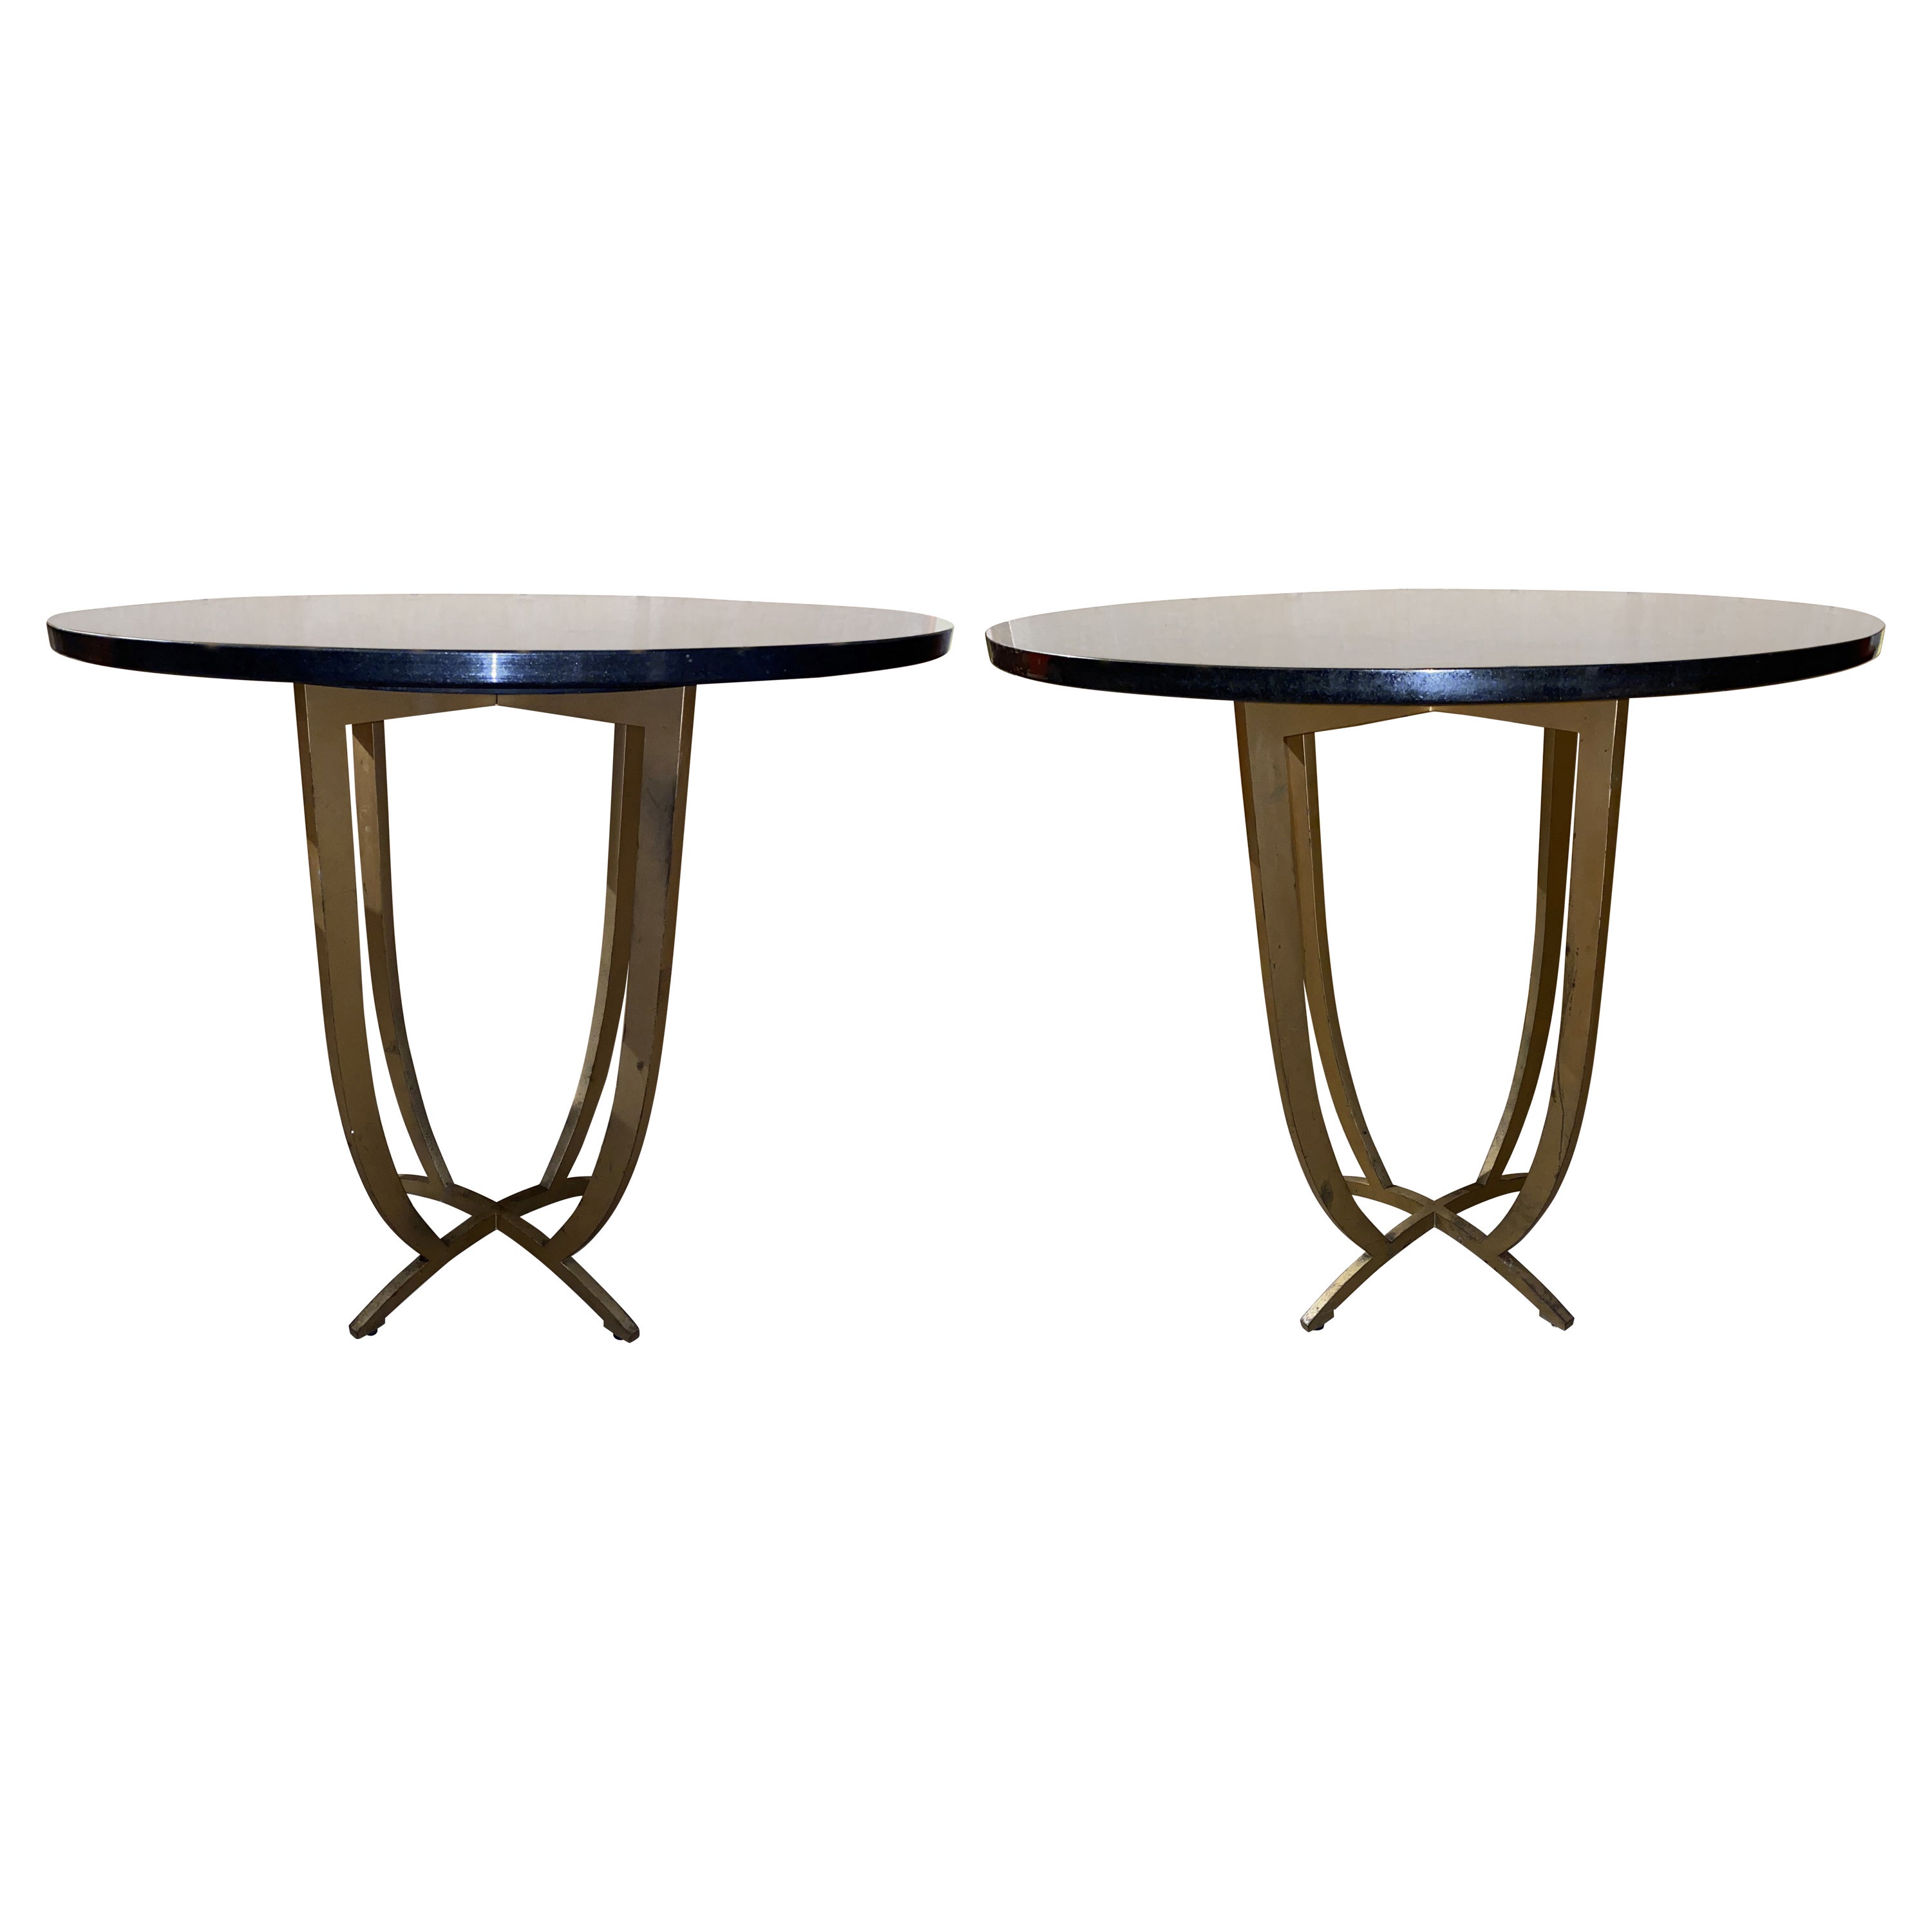 Pair of Modernist Marble Top Tables with Iron Bases